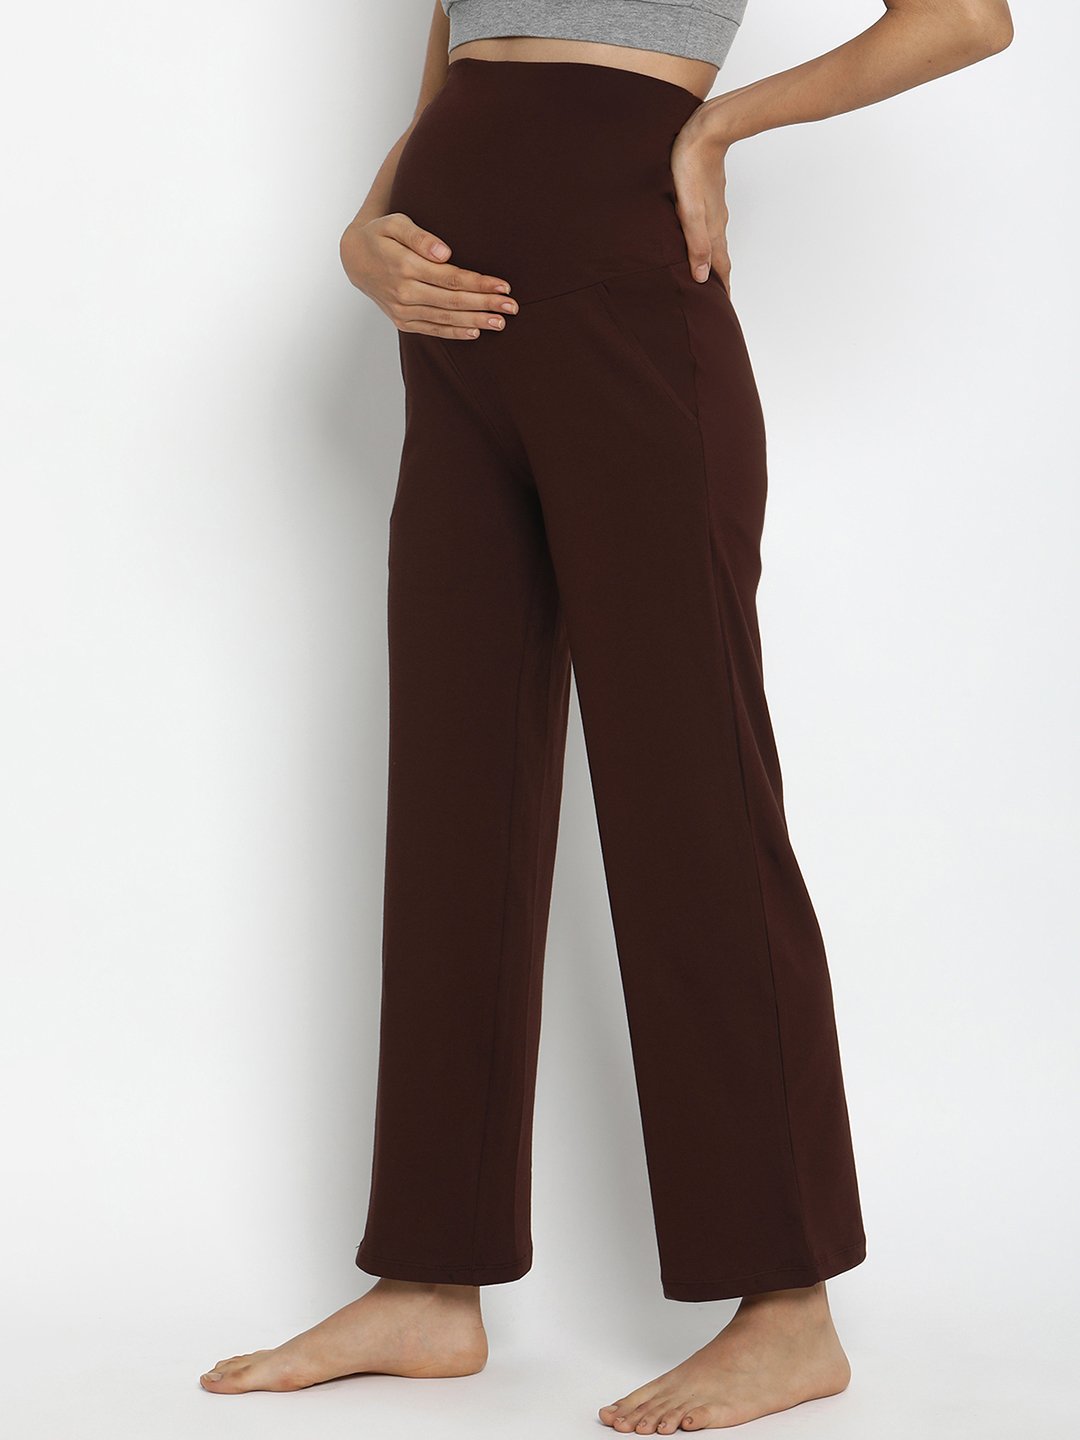 Women's Maternity Comfy Palazzo Lounge Pants Stretch Pregnancy High Waist  Loose Pants Trousers at Rs 399/piece, Trousers in Mumbai